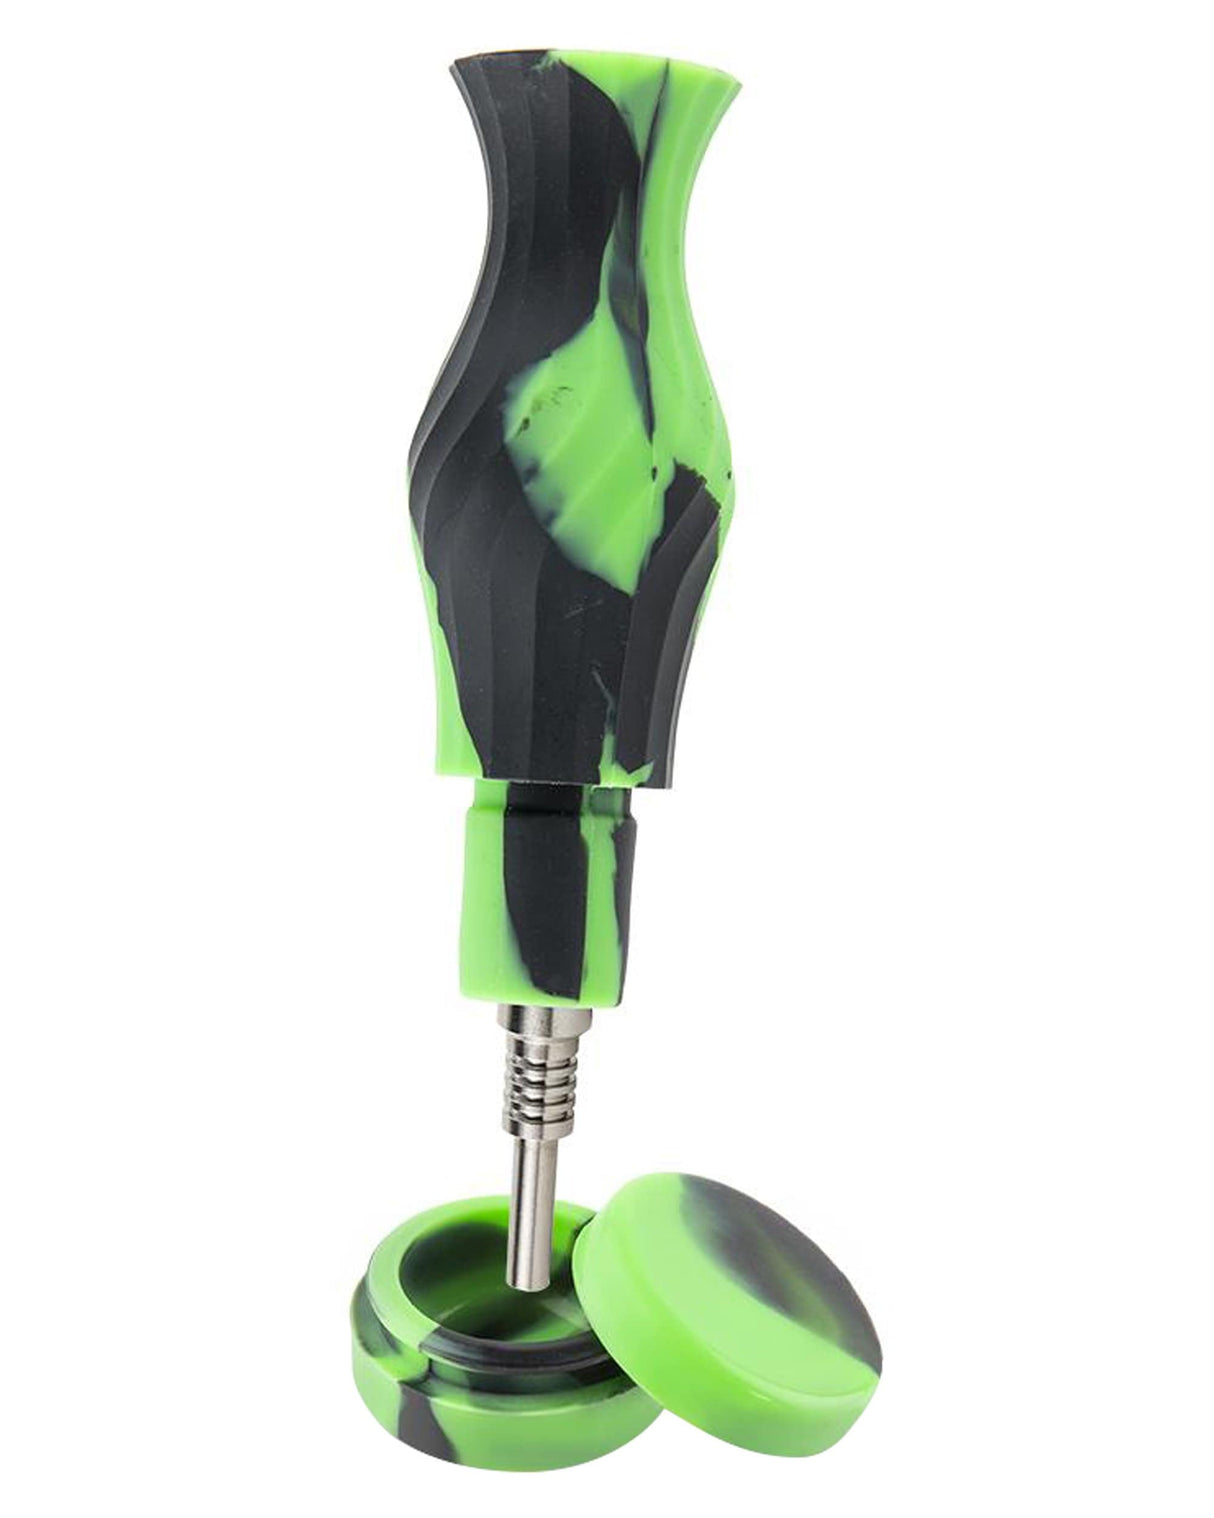 Ooze Echo 4-in-1 Silicone Bong in green, side view with stash jar, for dry herbs and concentrates